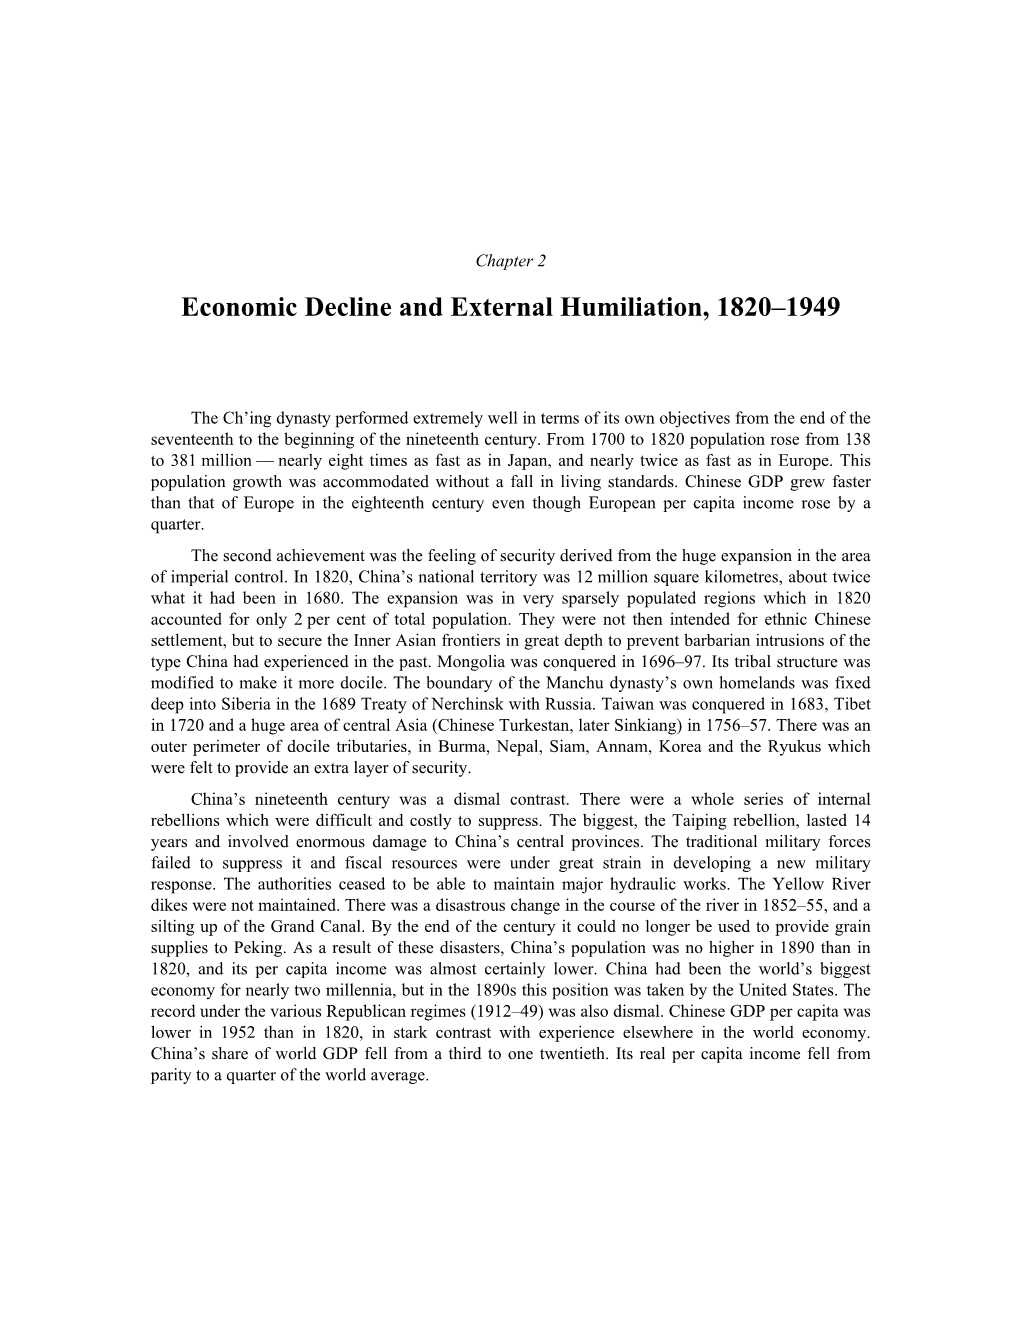 Chapter 2 Economic Decline and External Humiliation, 1820-1949